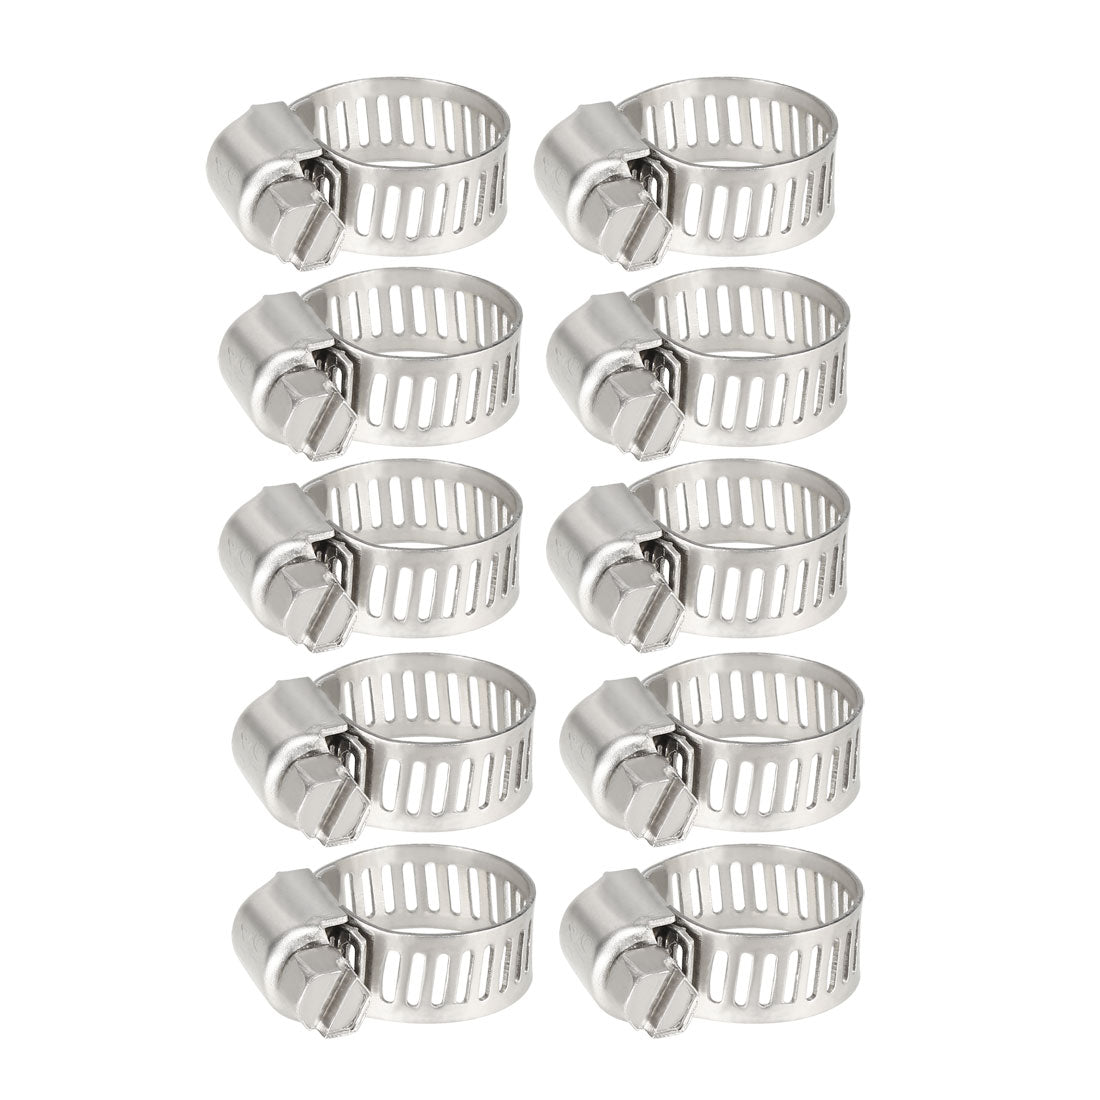 uxcell Uxcell 10-16mm  Gear Hose Clamp, 304 Stainless Steel Fuel Line Clamp 10 Pcs